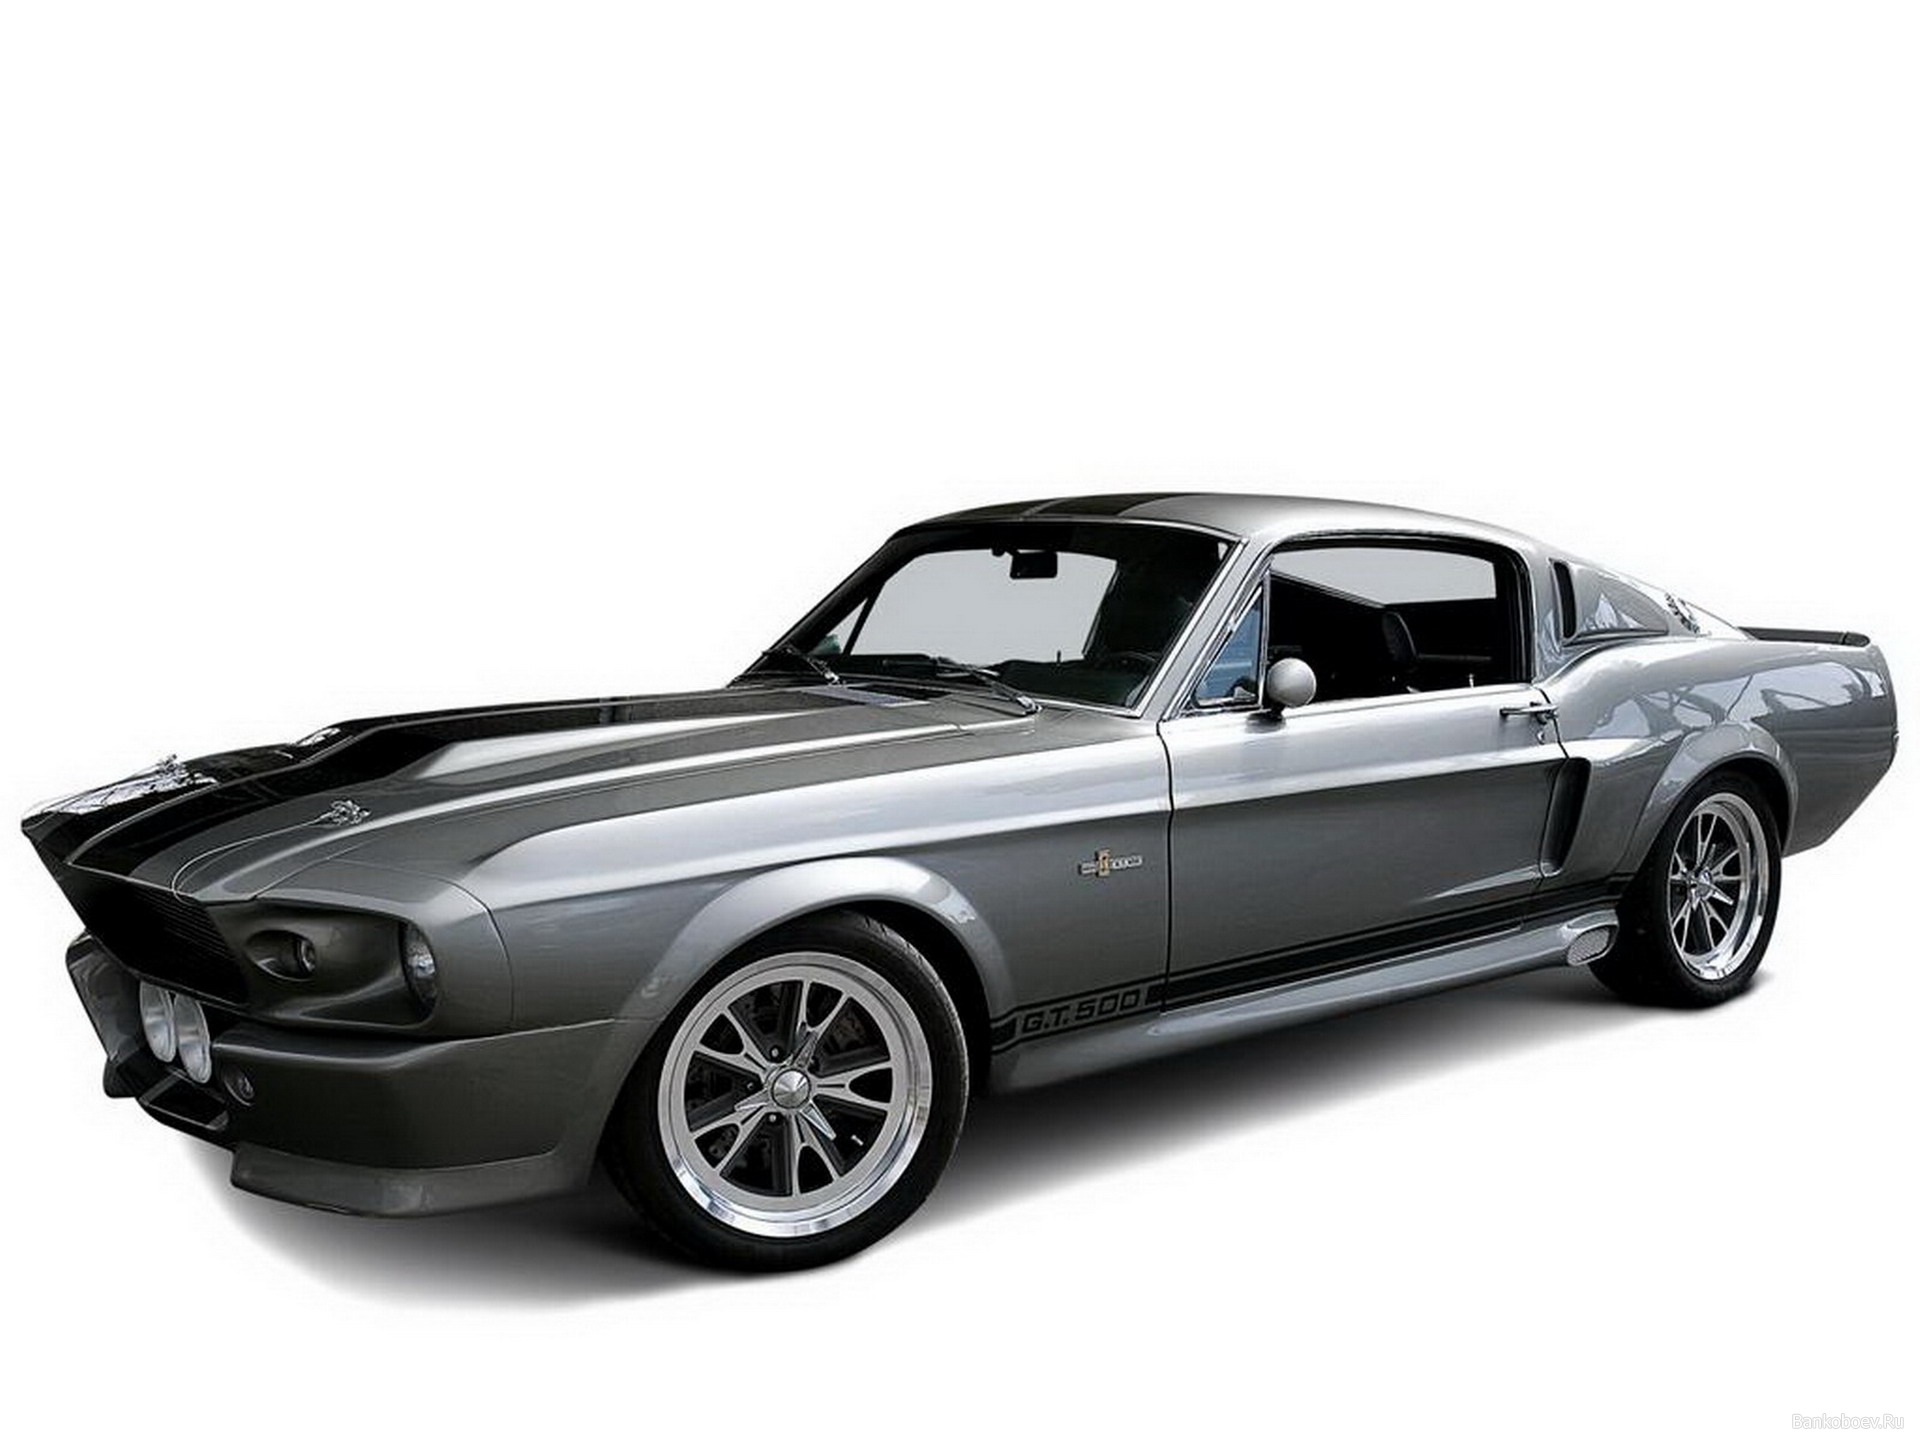 Ford Mustang Shelby Gt500 Image